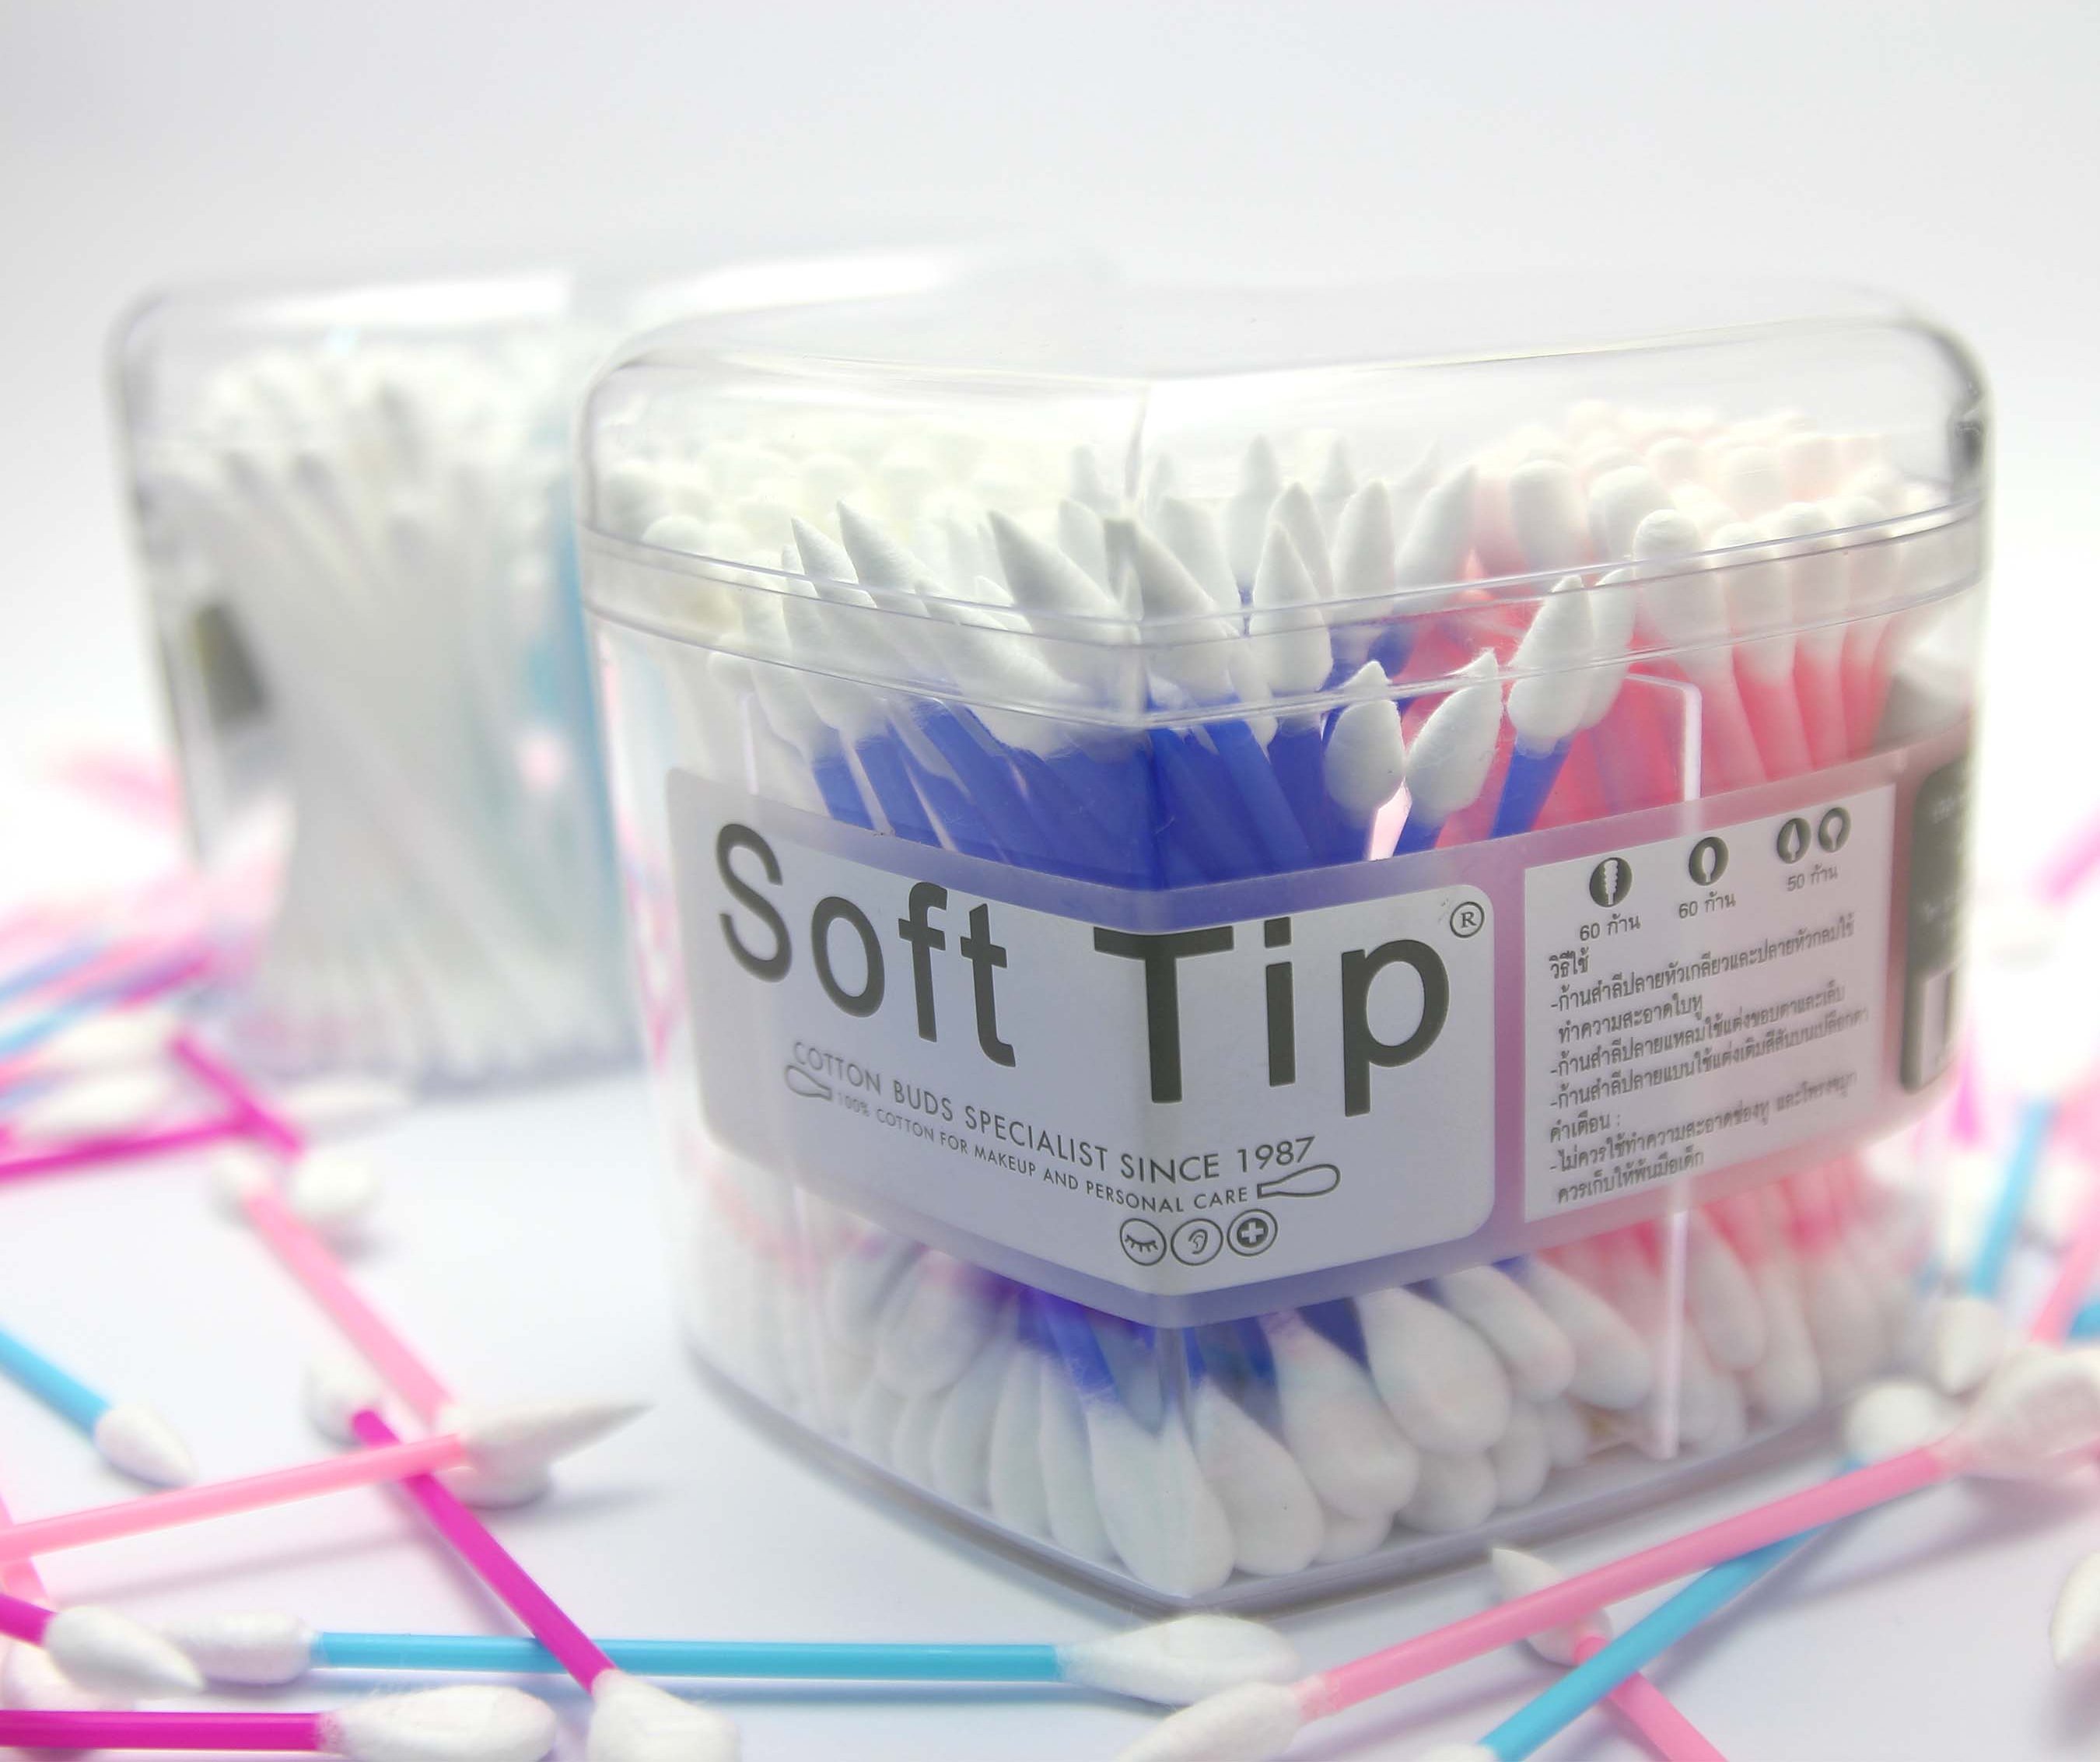 Soft Tip Cotton Tips for various purpose